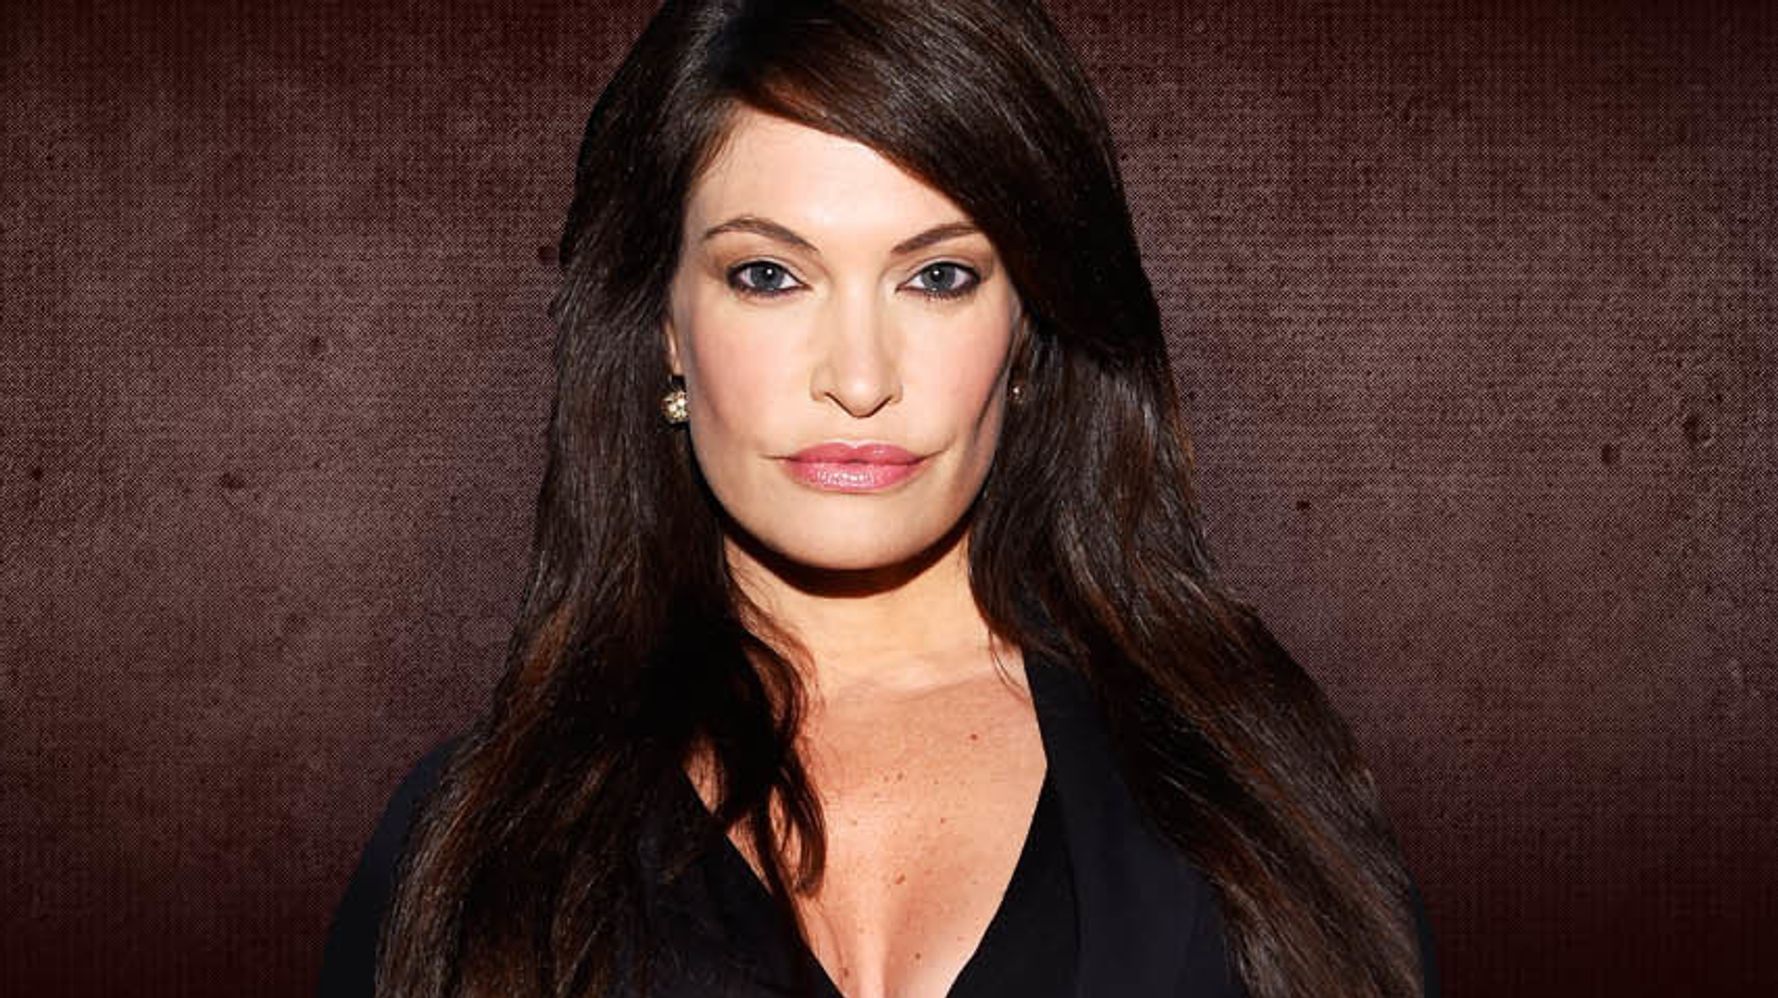 Kimberly Guilfoyle Nude Fucking - Exclusive: Kimberly Guilfoyle Left Fox News After Investigation Into  Misconduct Allegations, Sources Say | HuffPost